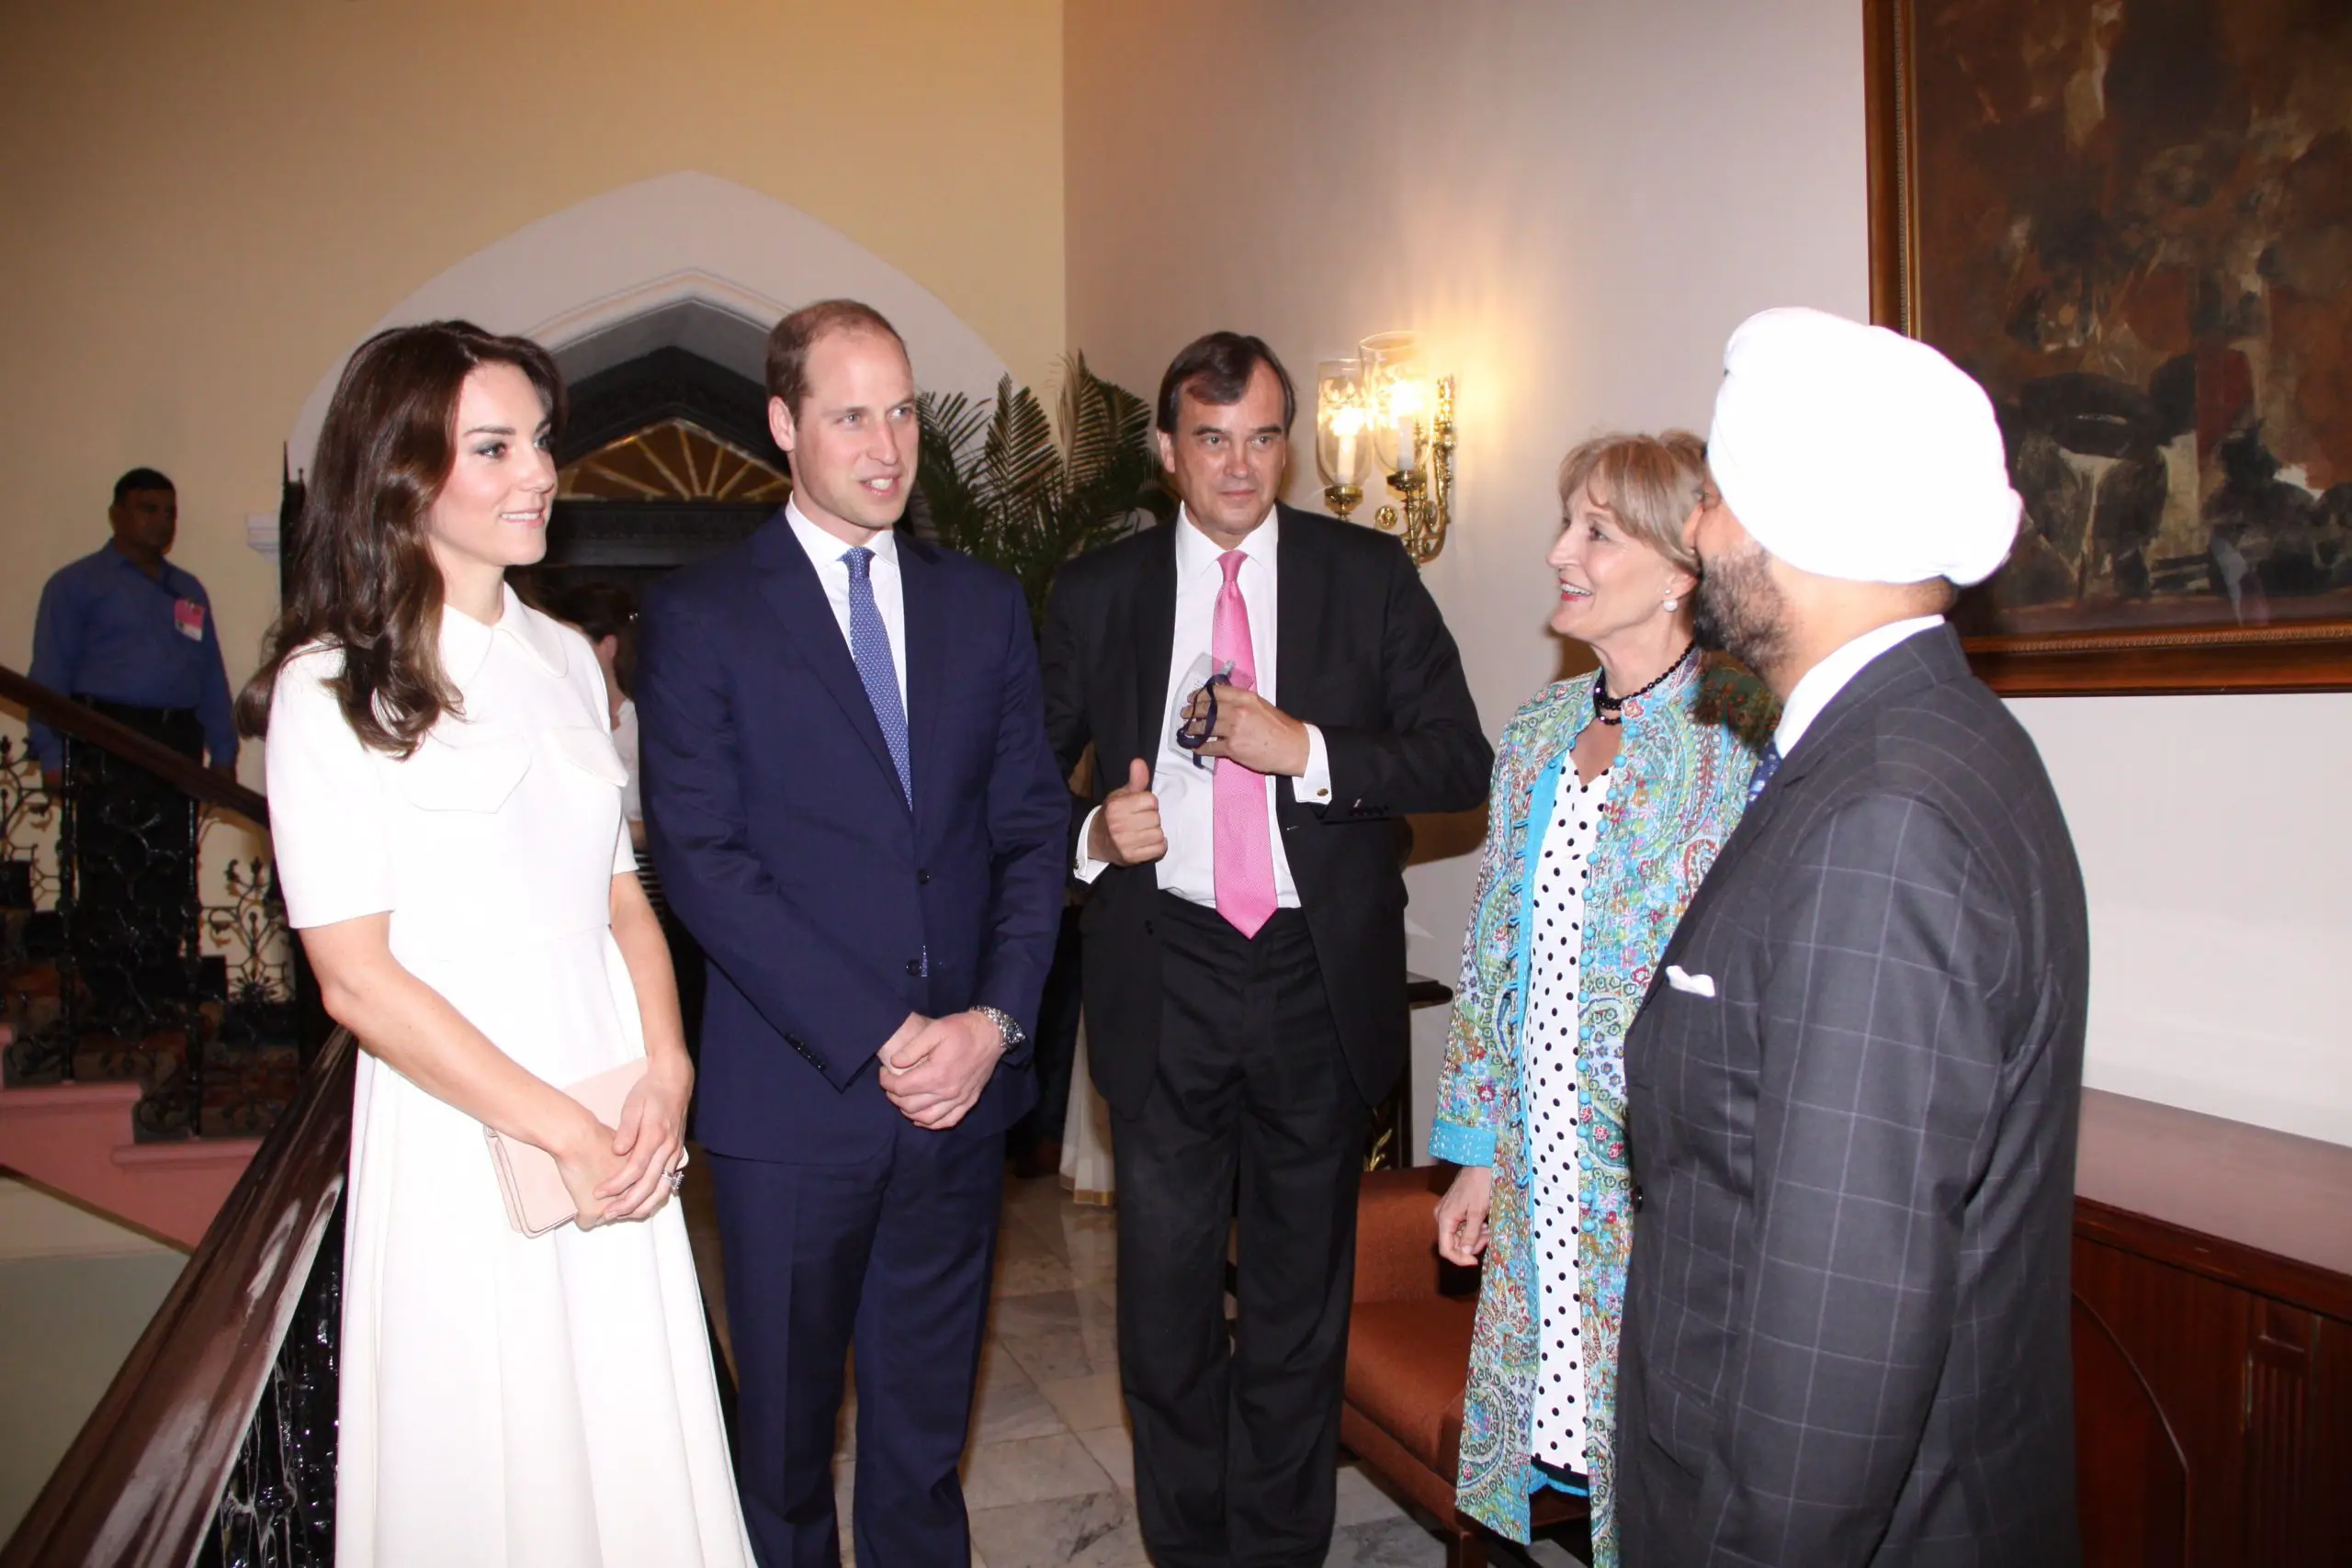 The Duke and Duchess of Cambridge left Taj Mahal hotel on day 2 of the India visit